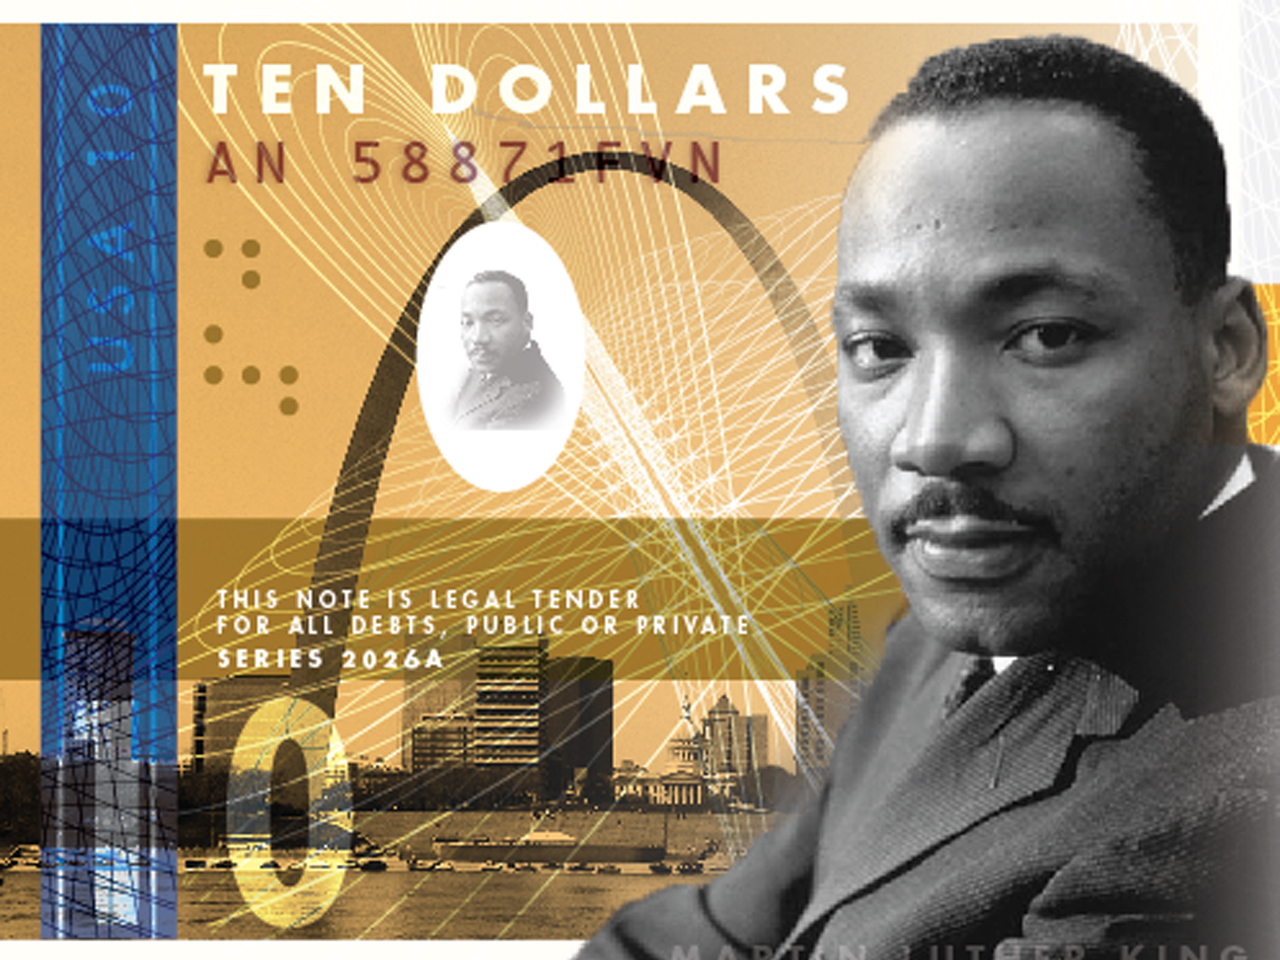 Martin Luther King Jr. - Alternative designs for U.S. currency - Pictures - CBS News1280 x 960